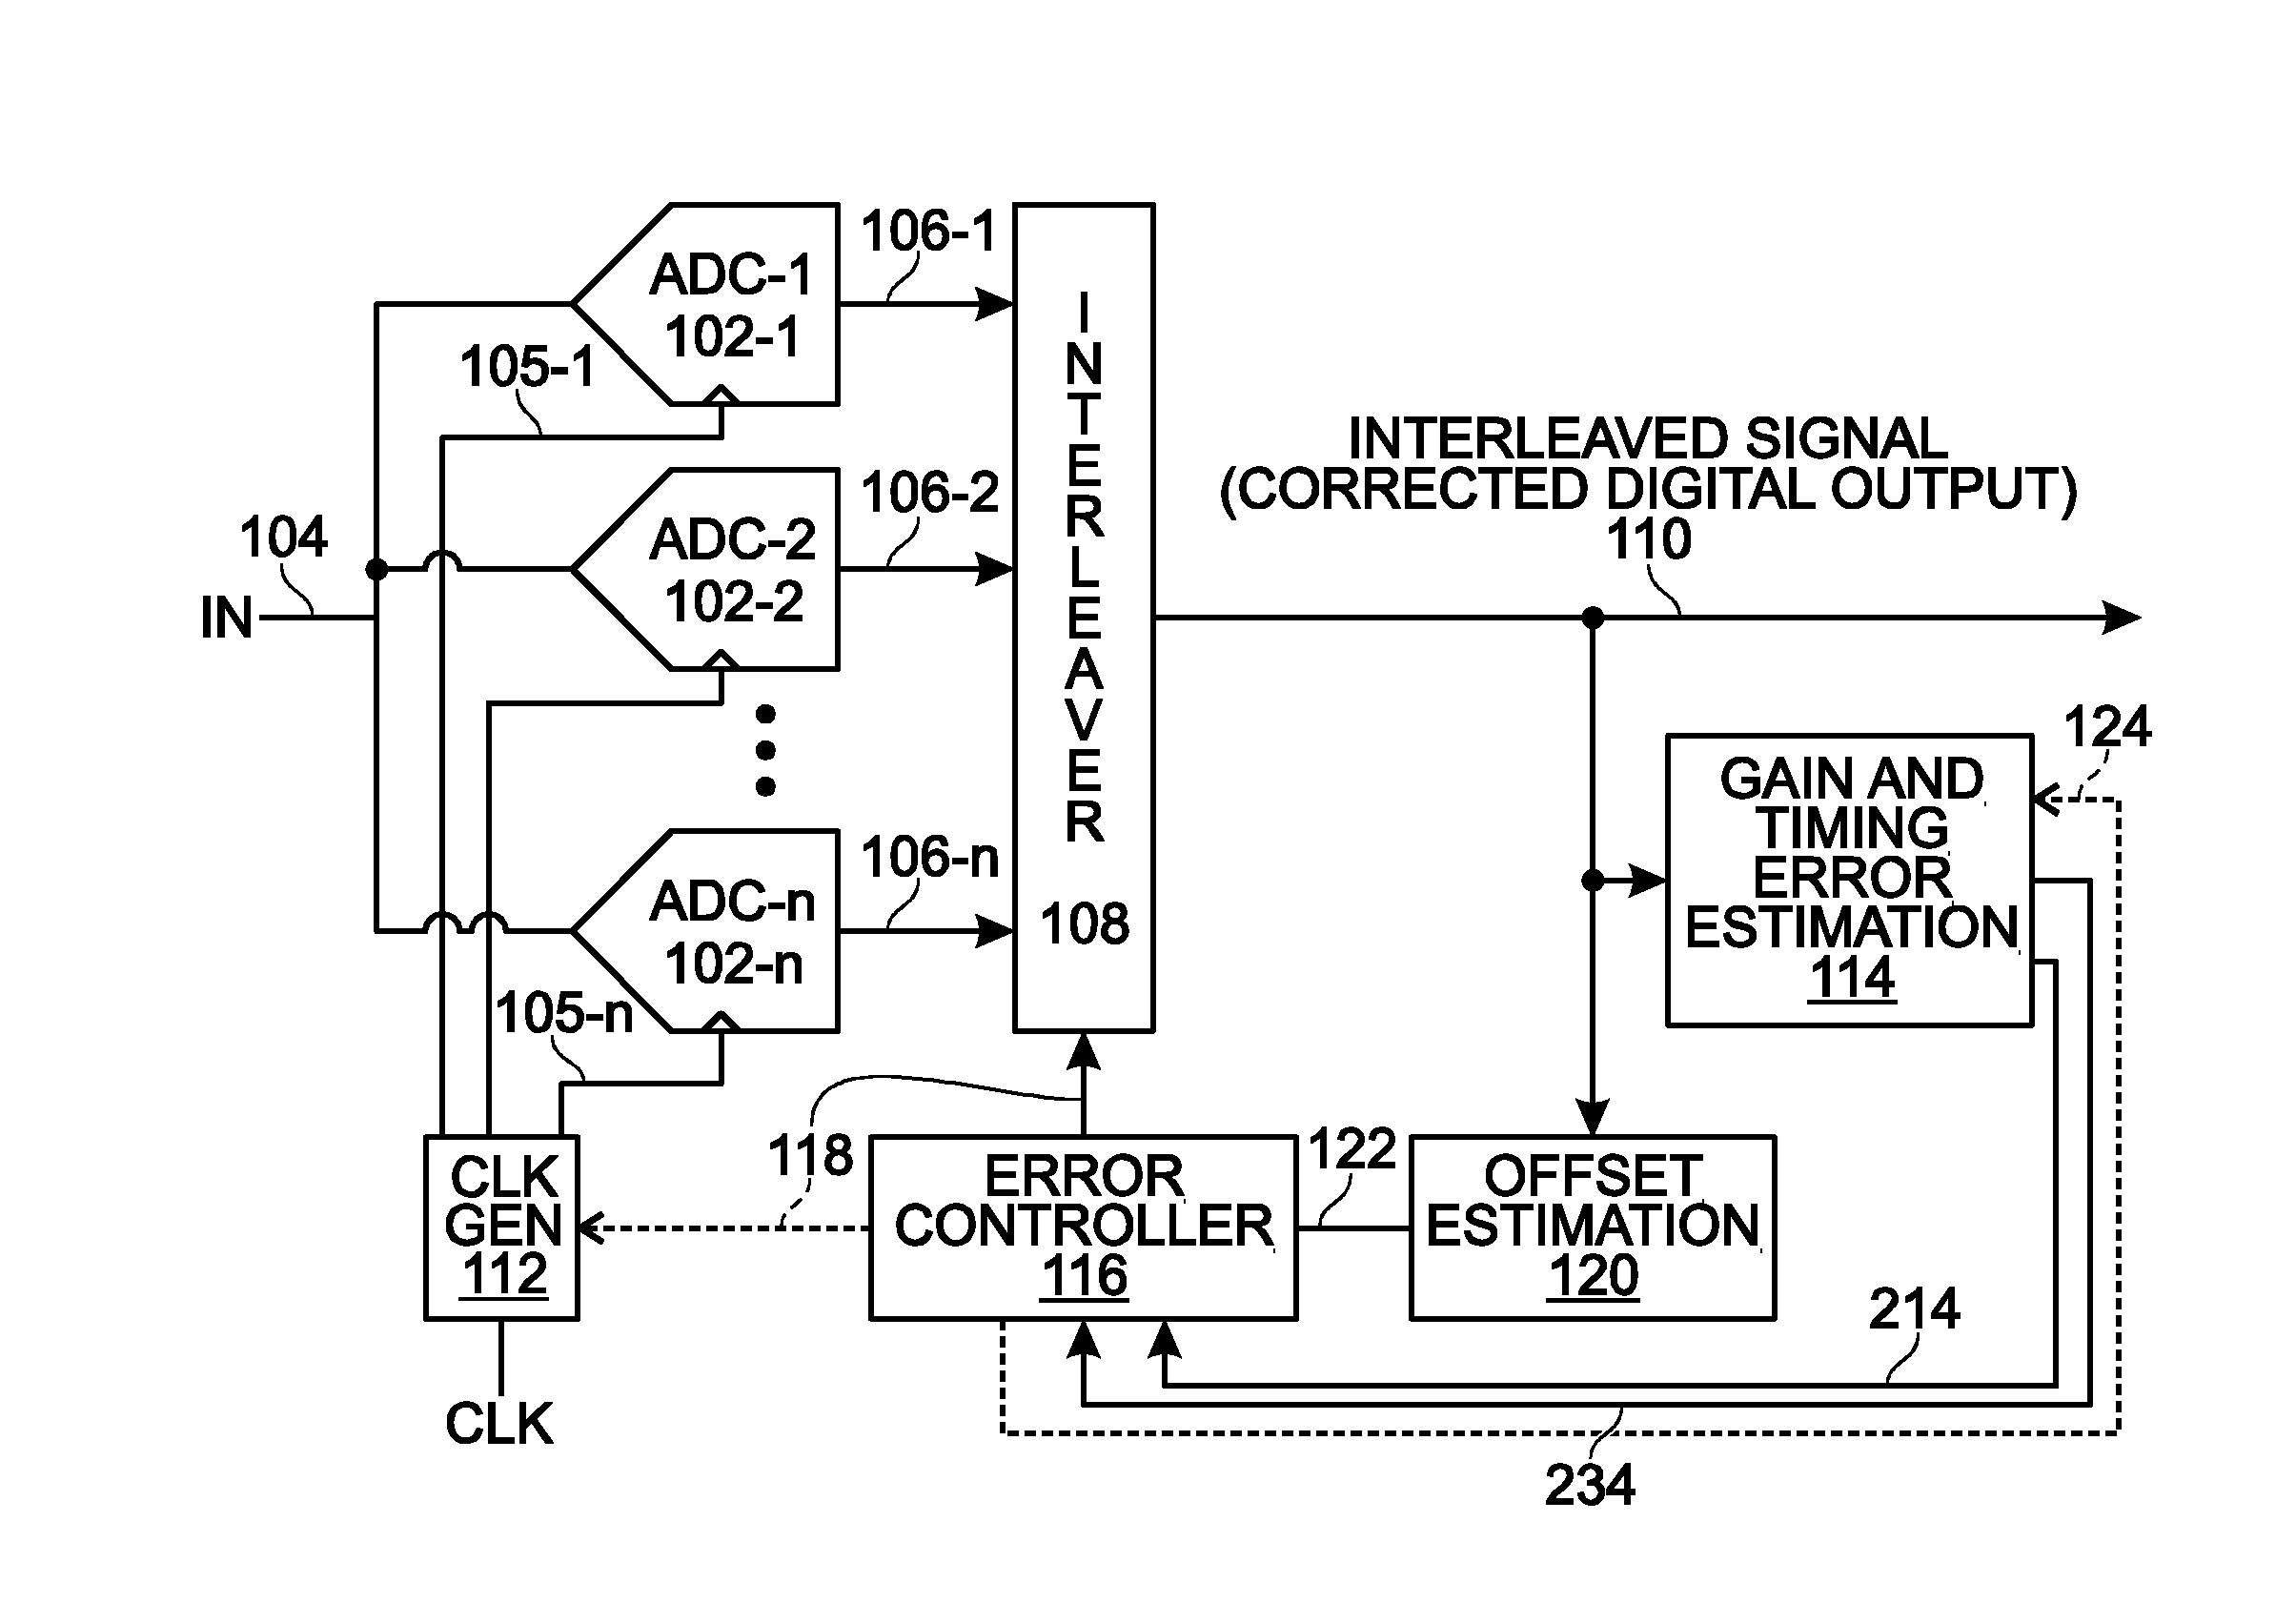 N-Path Interleaving Analog-to-Digital Converter (ADC) with Offset gain and Timing Mismatch Calibration